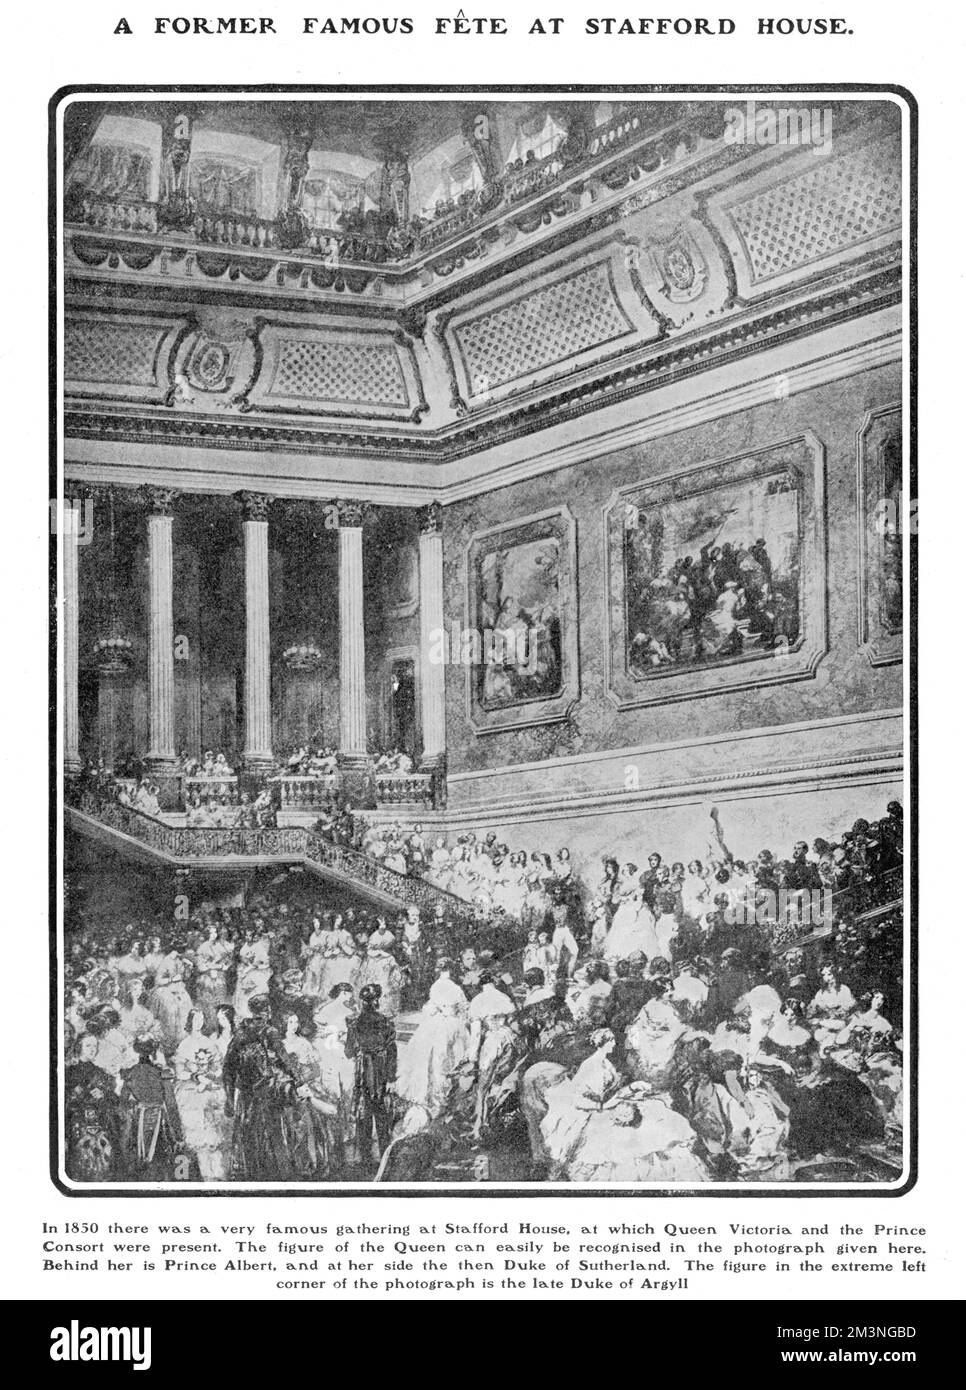 Page from The Tatler, 3rd July 1901, featuring a famous gathering at Stafford House in 1850 at which Queen Victoria and Prince Albert were present. At her side in the picture is the then Duke of Sutherland. The figure in the extreme left corner is the late Duke of Argyll.     Date: July 1901 Stock Photo